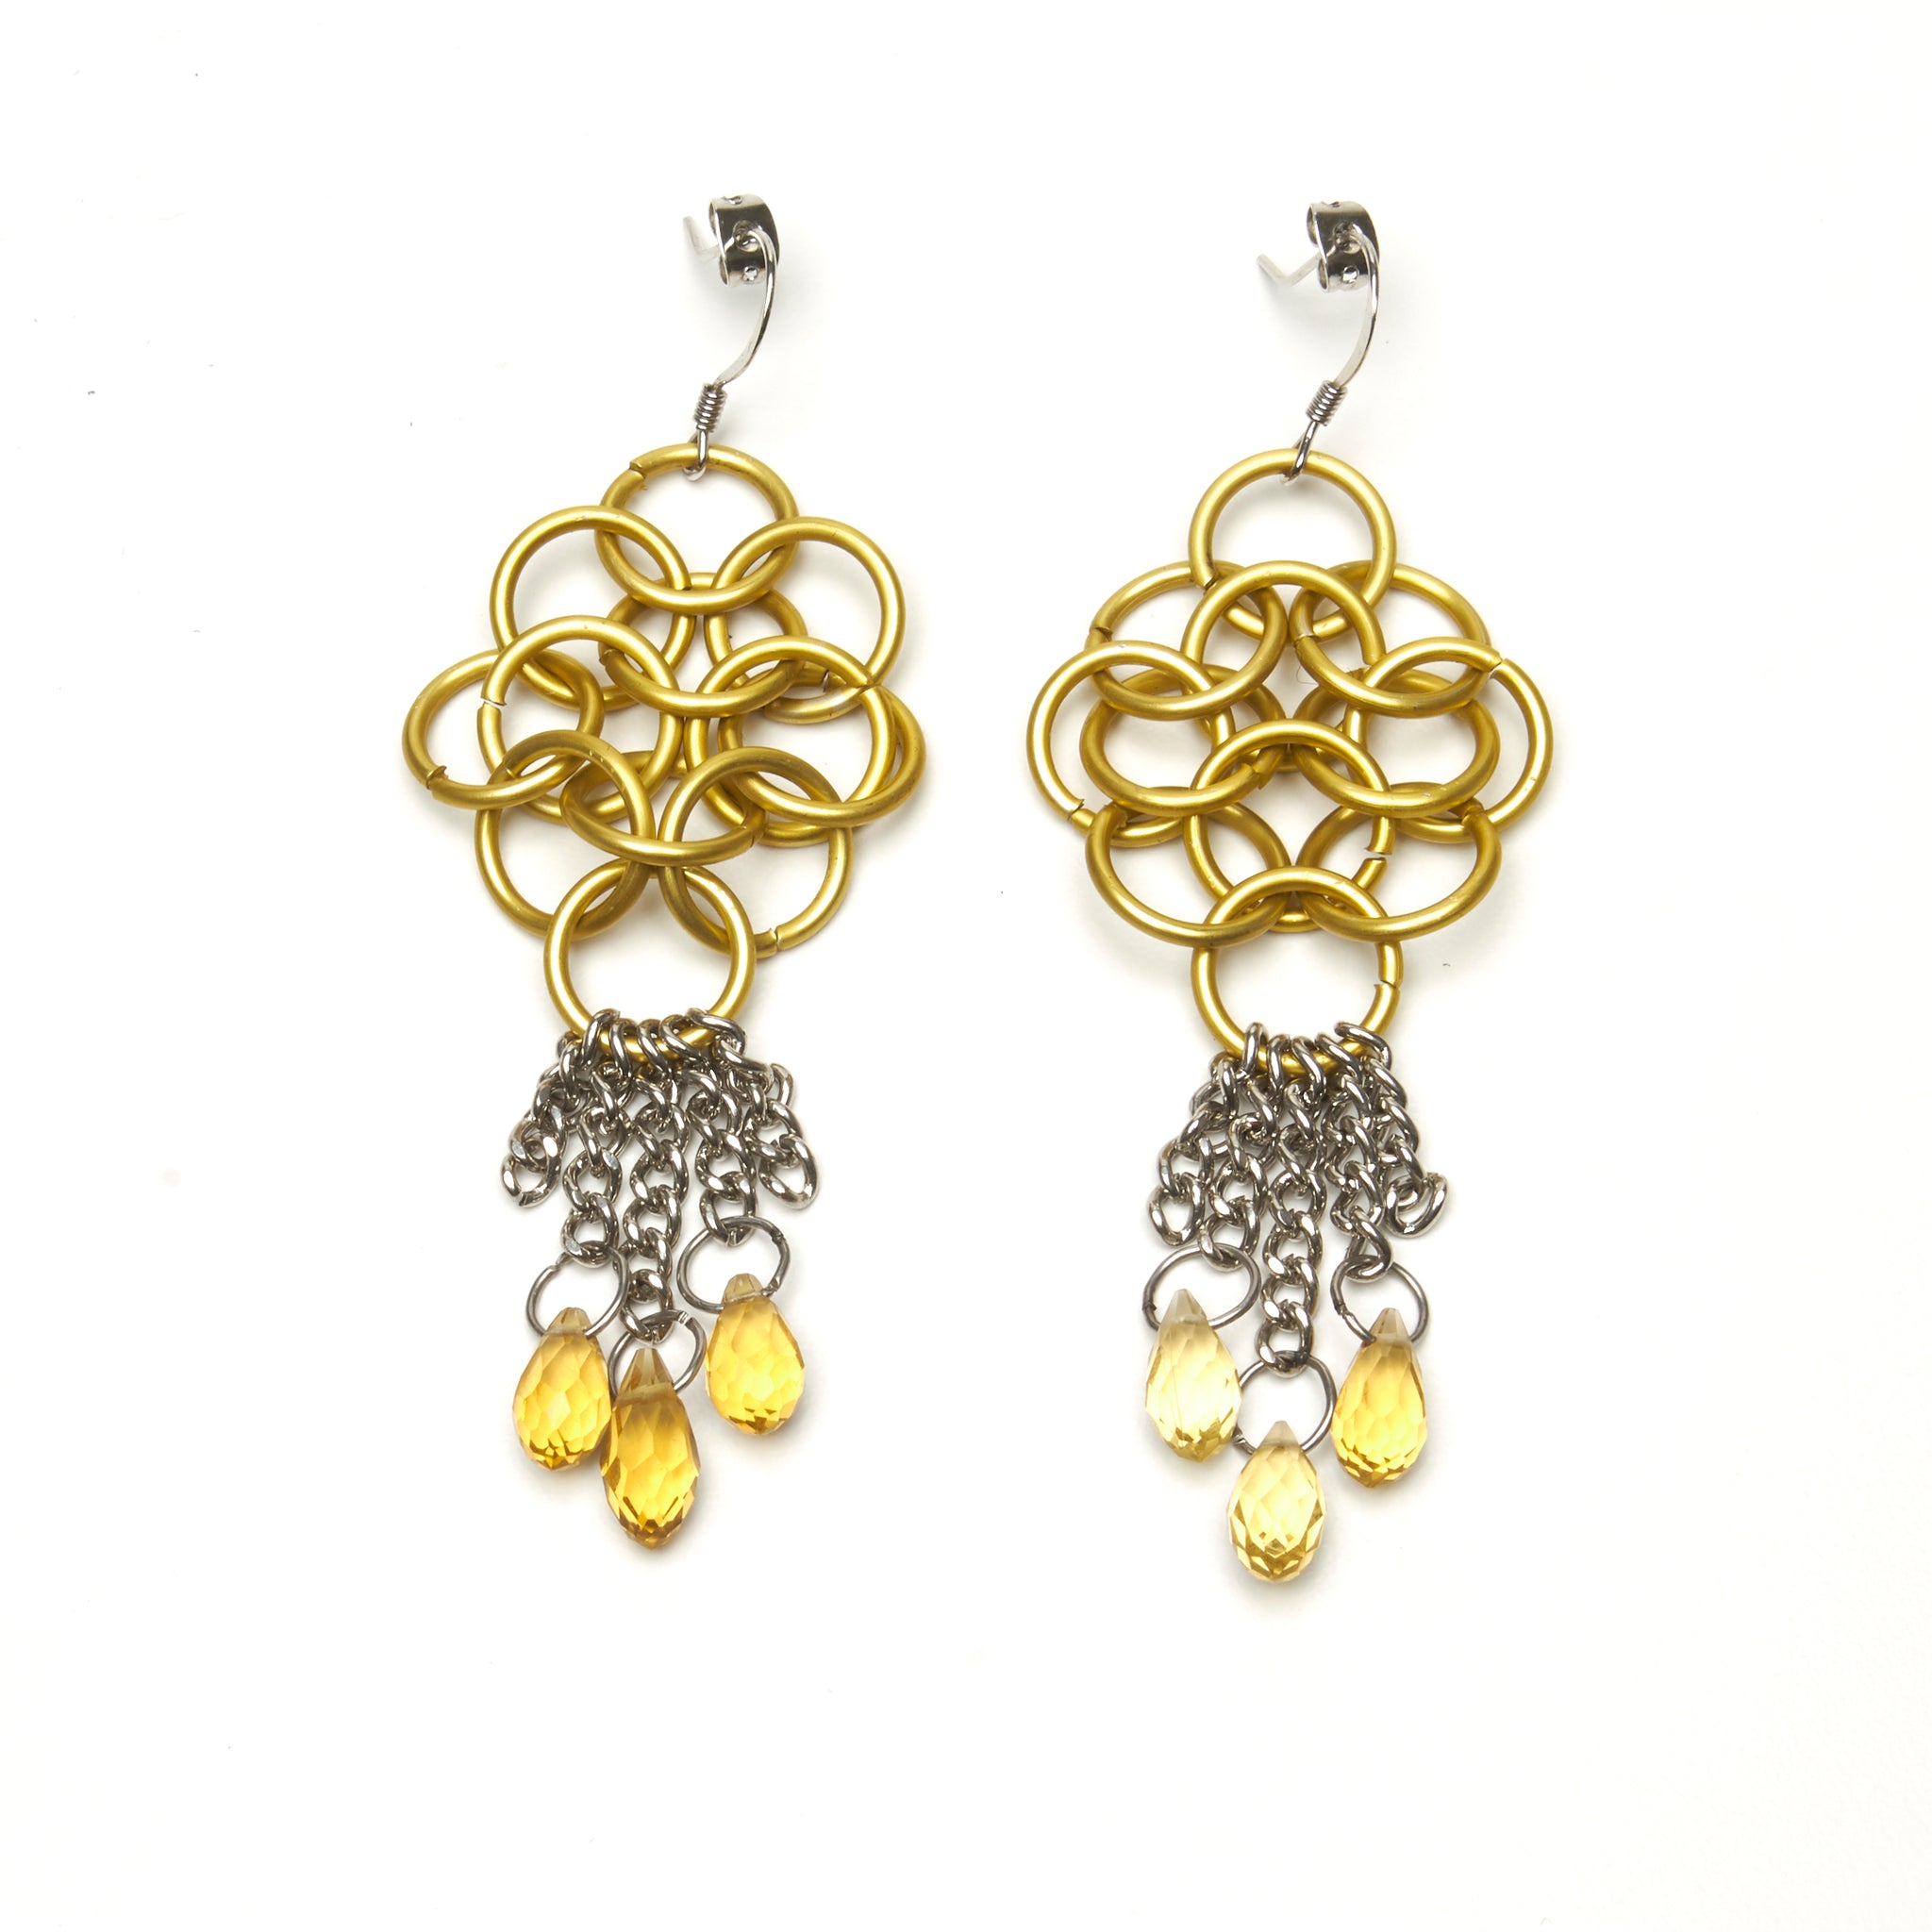 CHAINMAILLE DROP EARRINGS WITH BRIOLETTES by nyet jewelry.